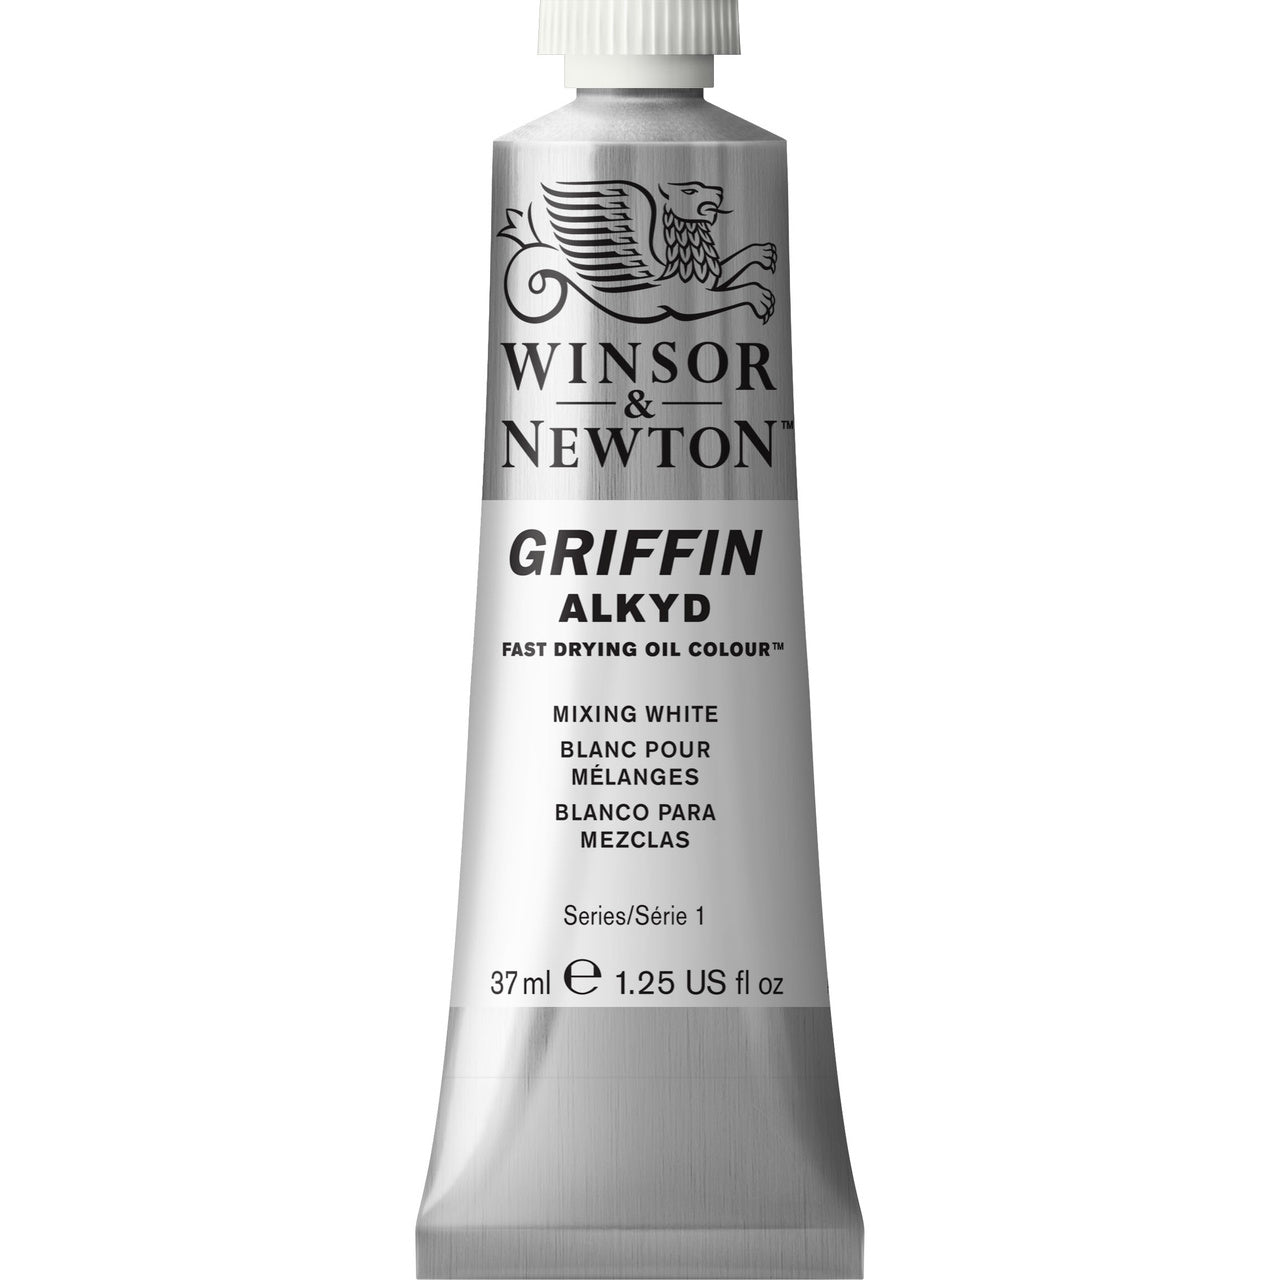 Winsor & Newton Griffin Alkyd 37ml Mixing White - merriartist.com